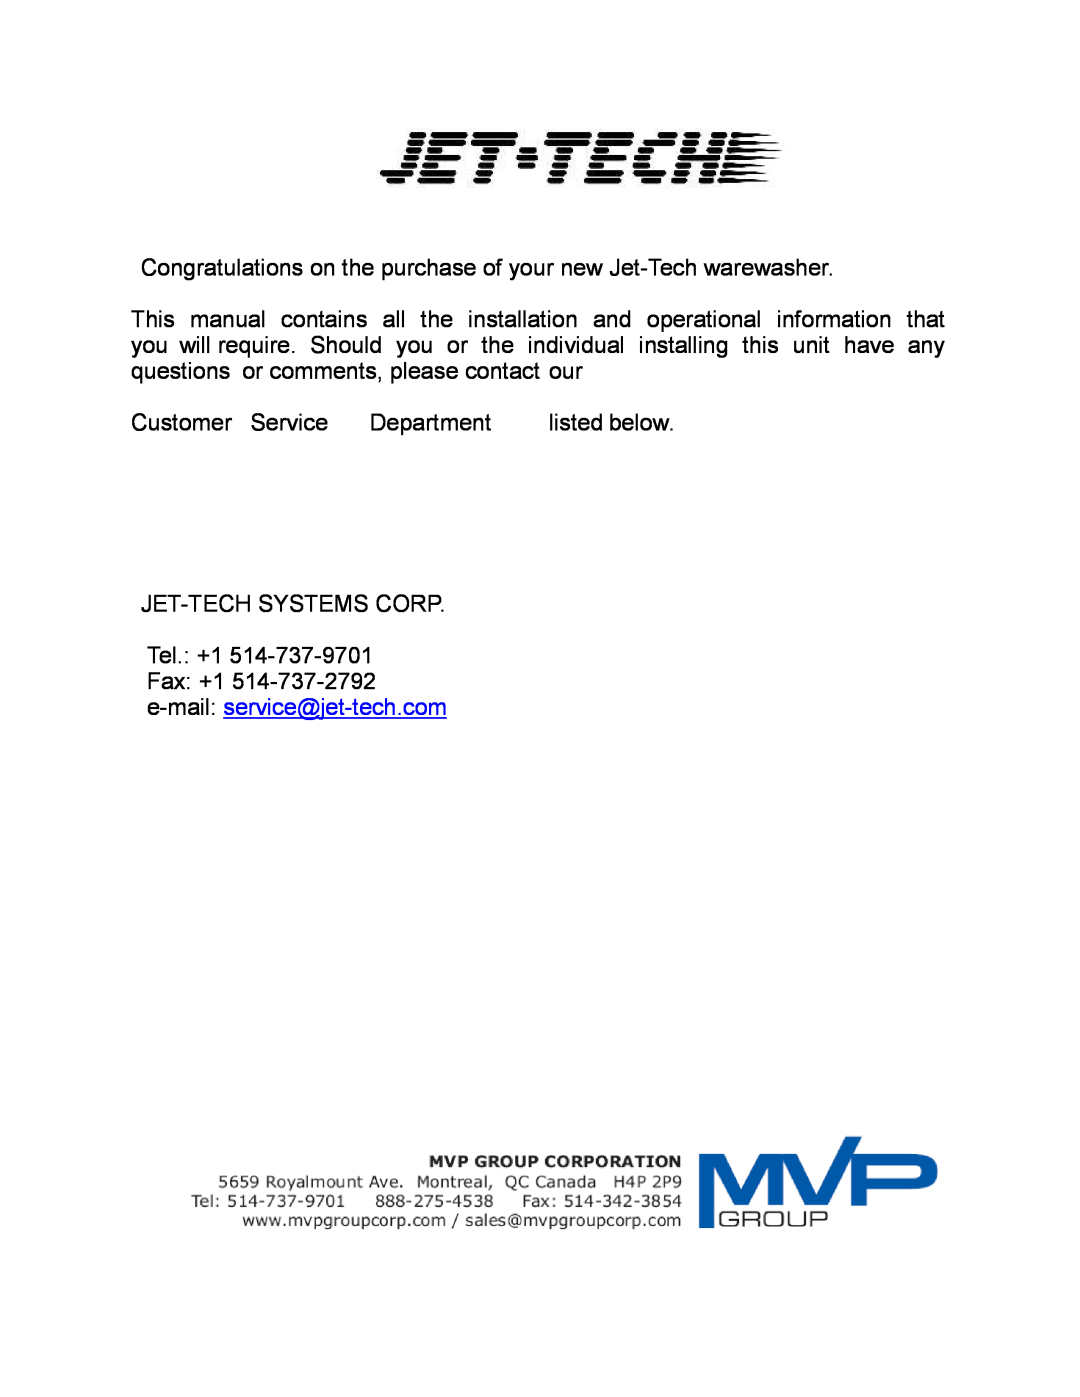 Jettech Metal Products FX-44 Congratulations on the purchase of your new Jet-Tech warewasher, Customer Service, Department 